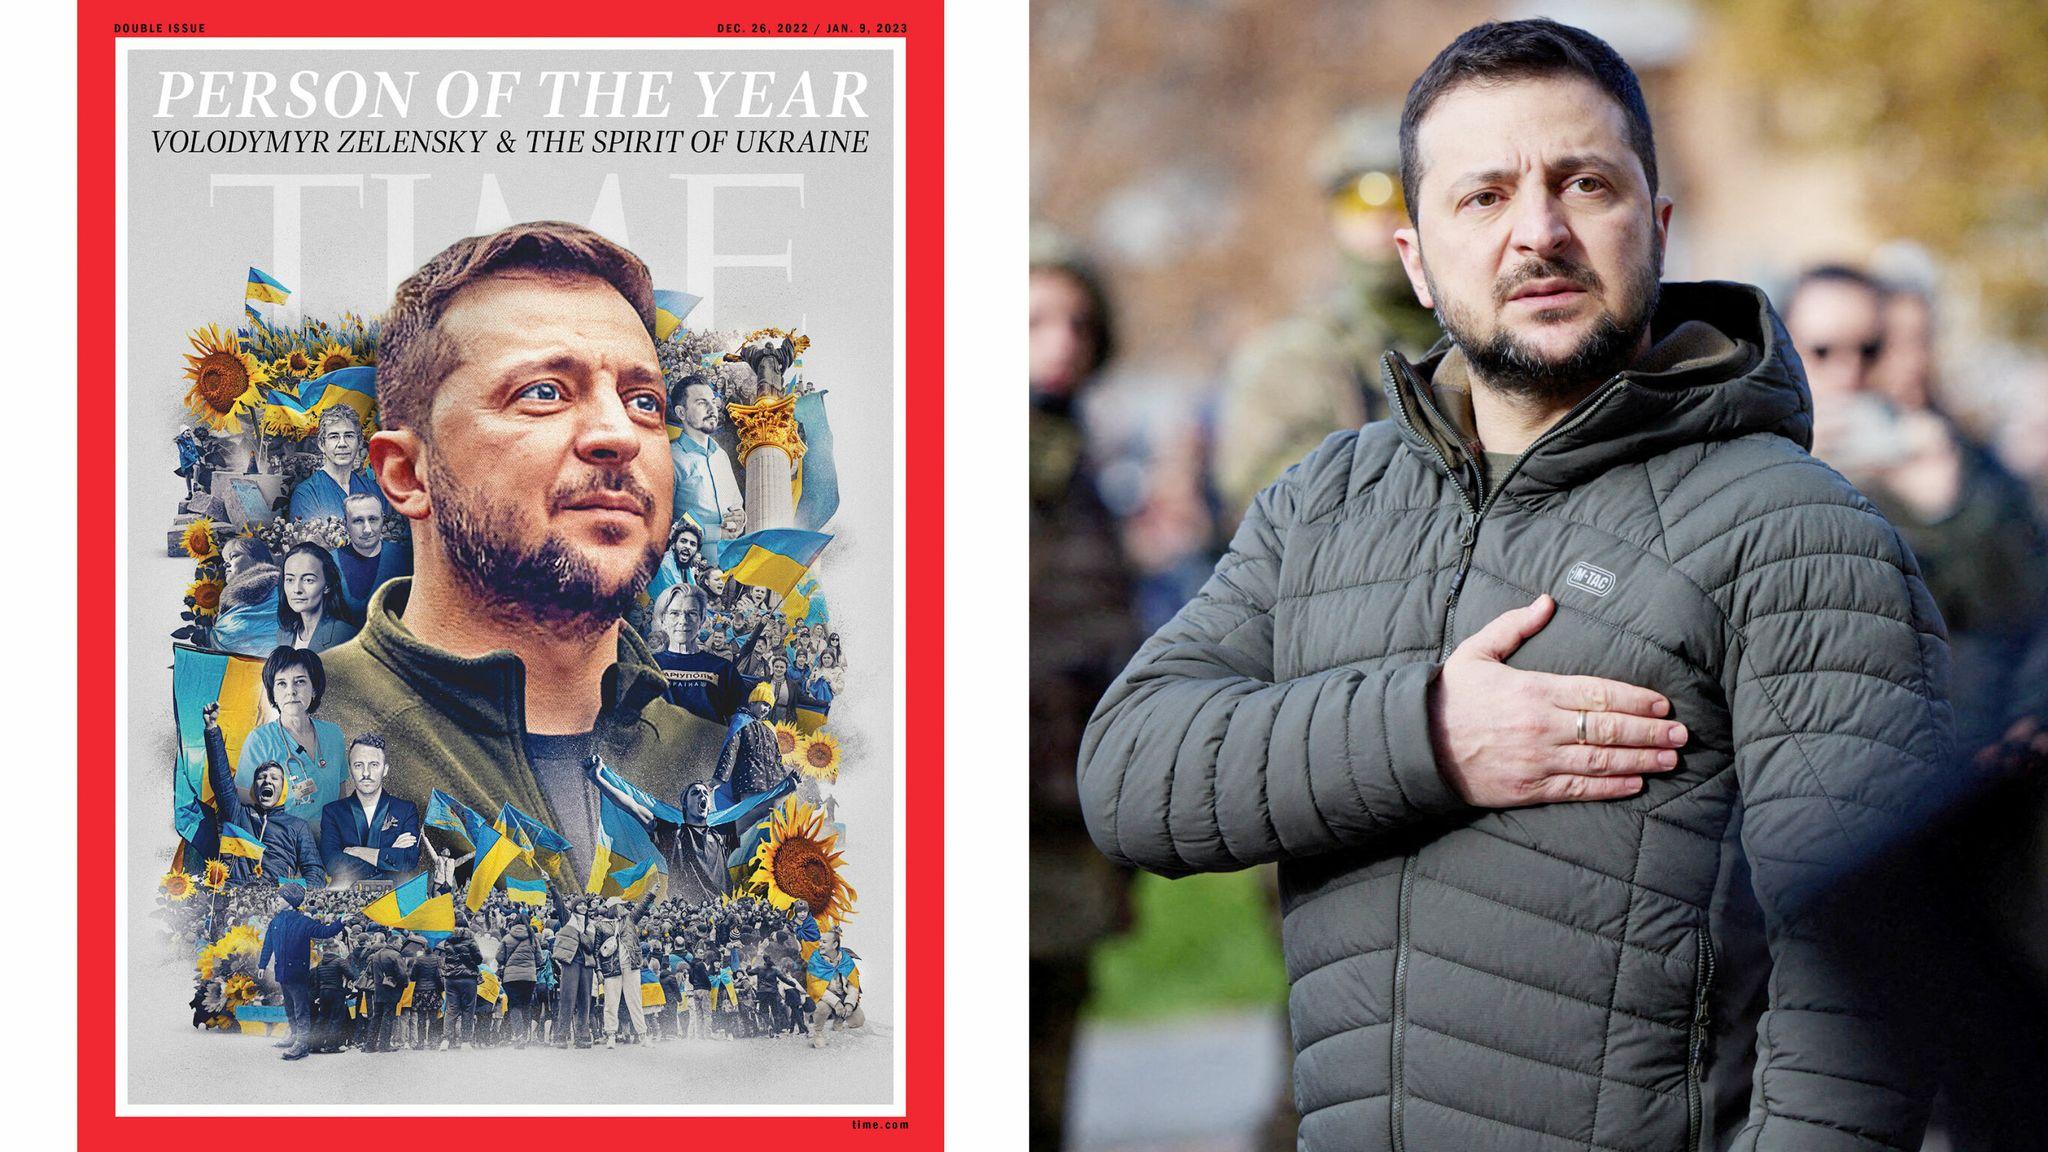 Time Magazine's 2022 Person of the Year: Volodymyr Zelensky and "Spirit of Ukraine"